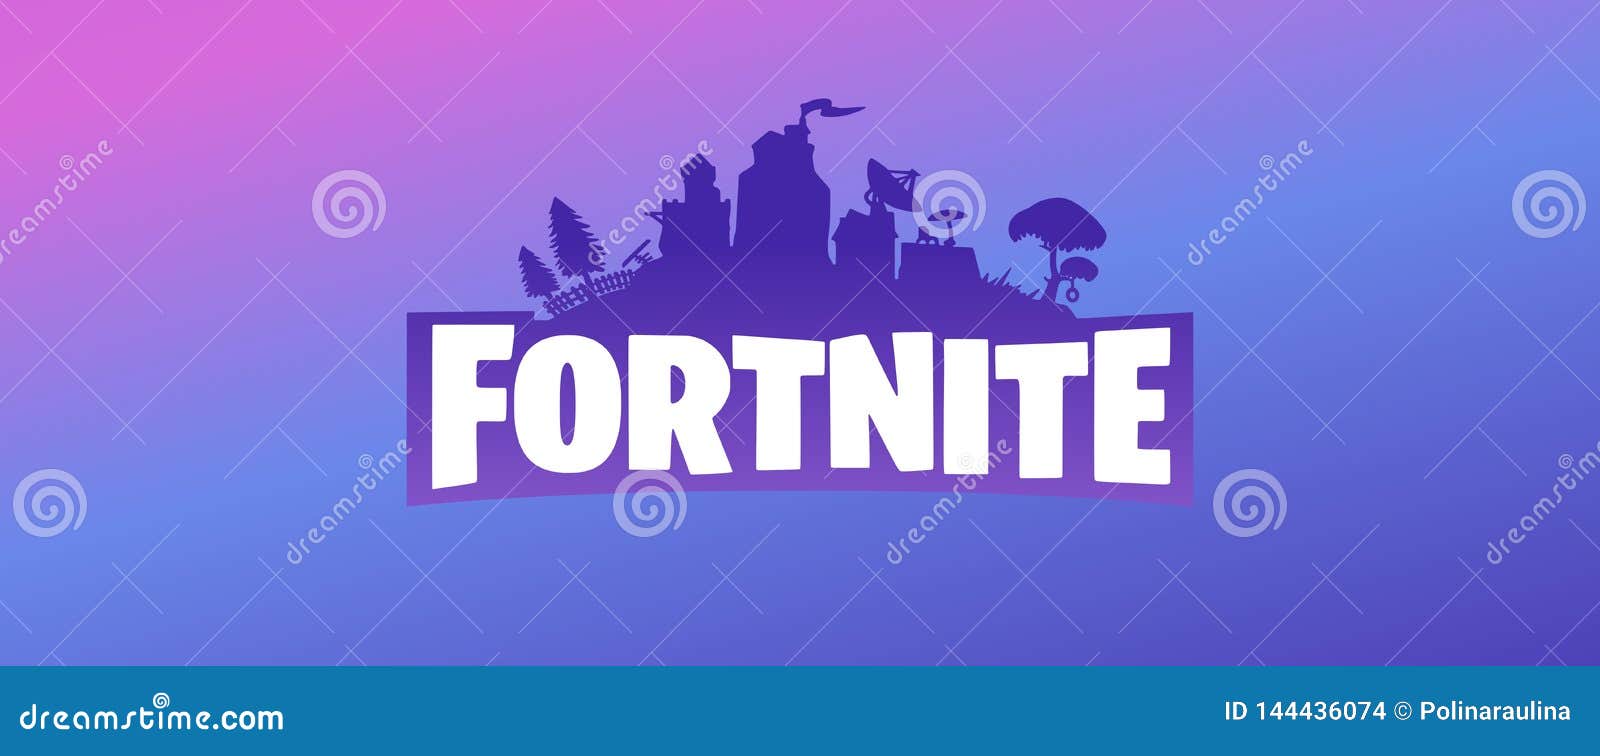 Design a 3d gaming  banner and logo call of duty, fortnite